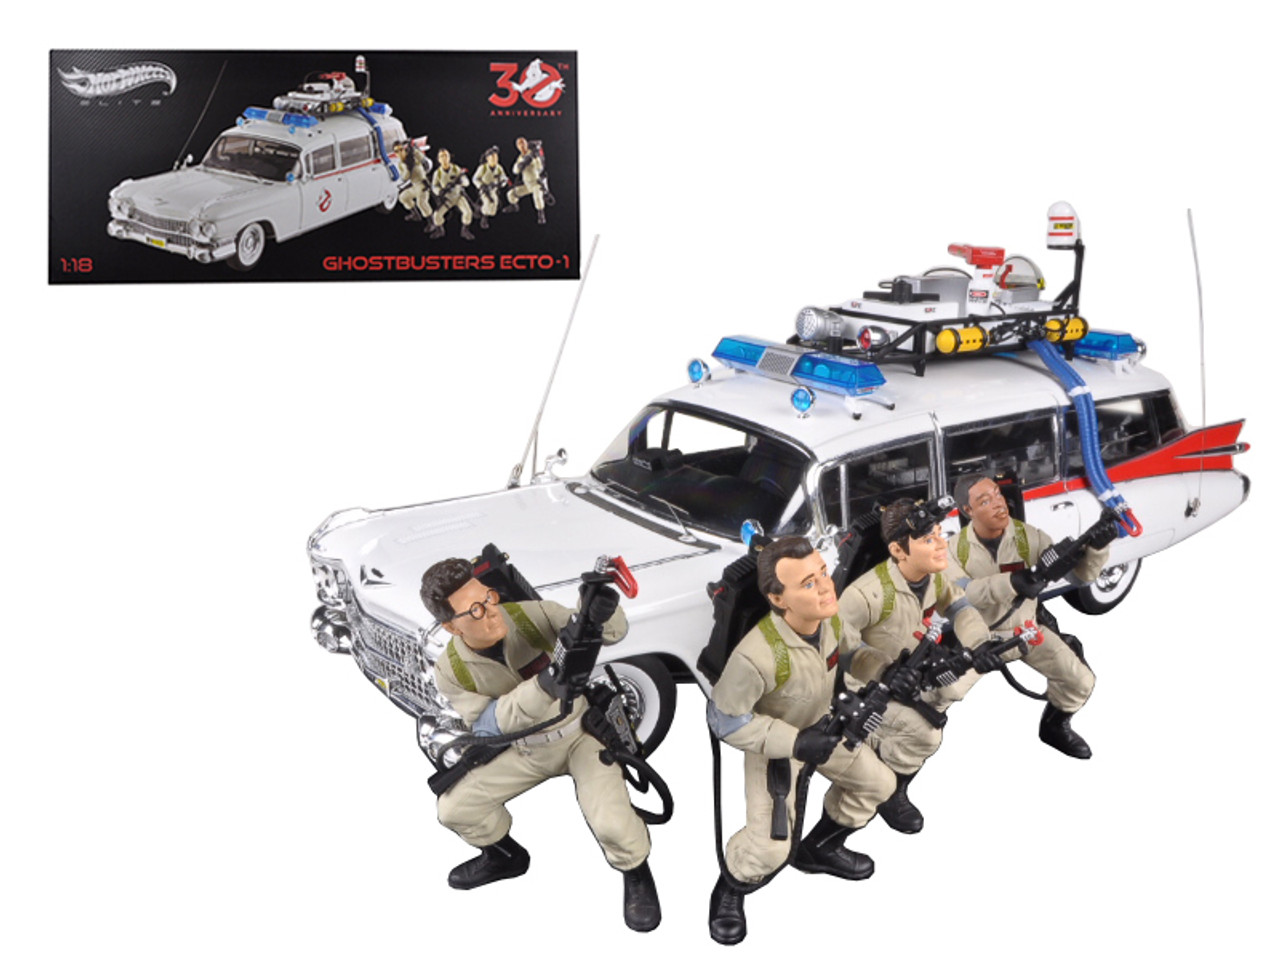 1/18 Hotwheels Hot Wheels Elite 1959 Cadillac Ambulance Ecto-1 From "Ghostbusters 1" Movie 30th Anniversary with 4 Figures Diecast Car Model